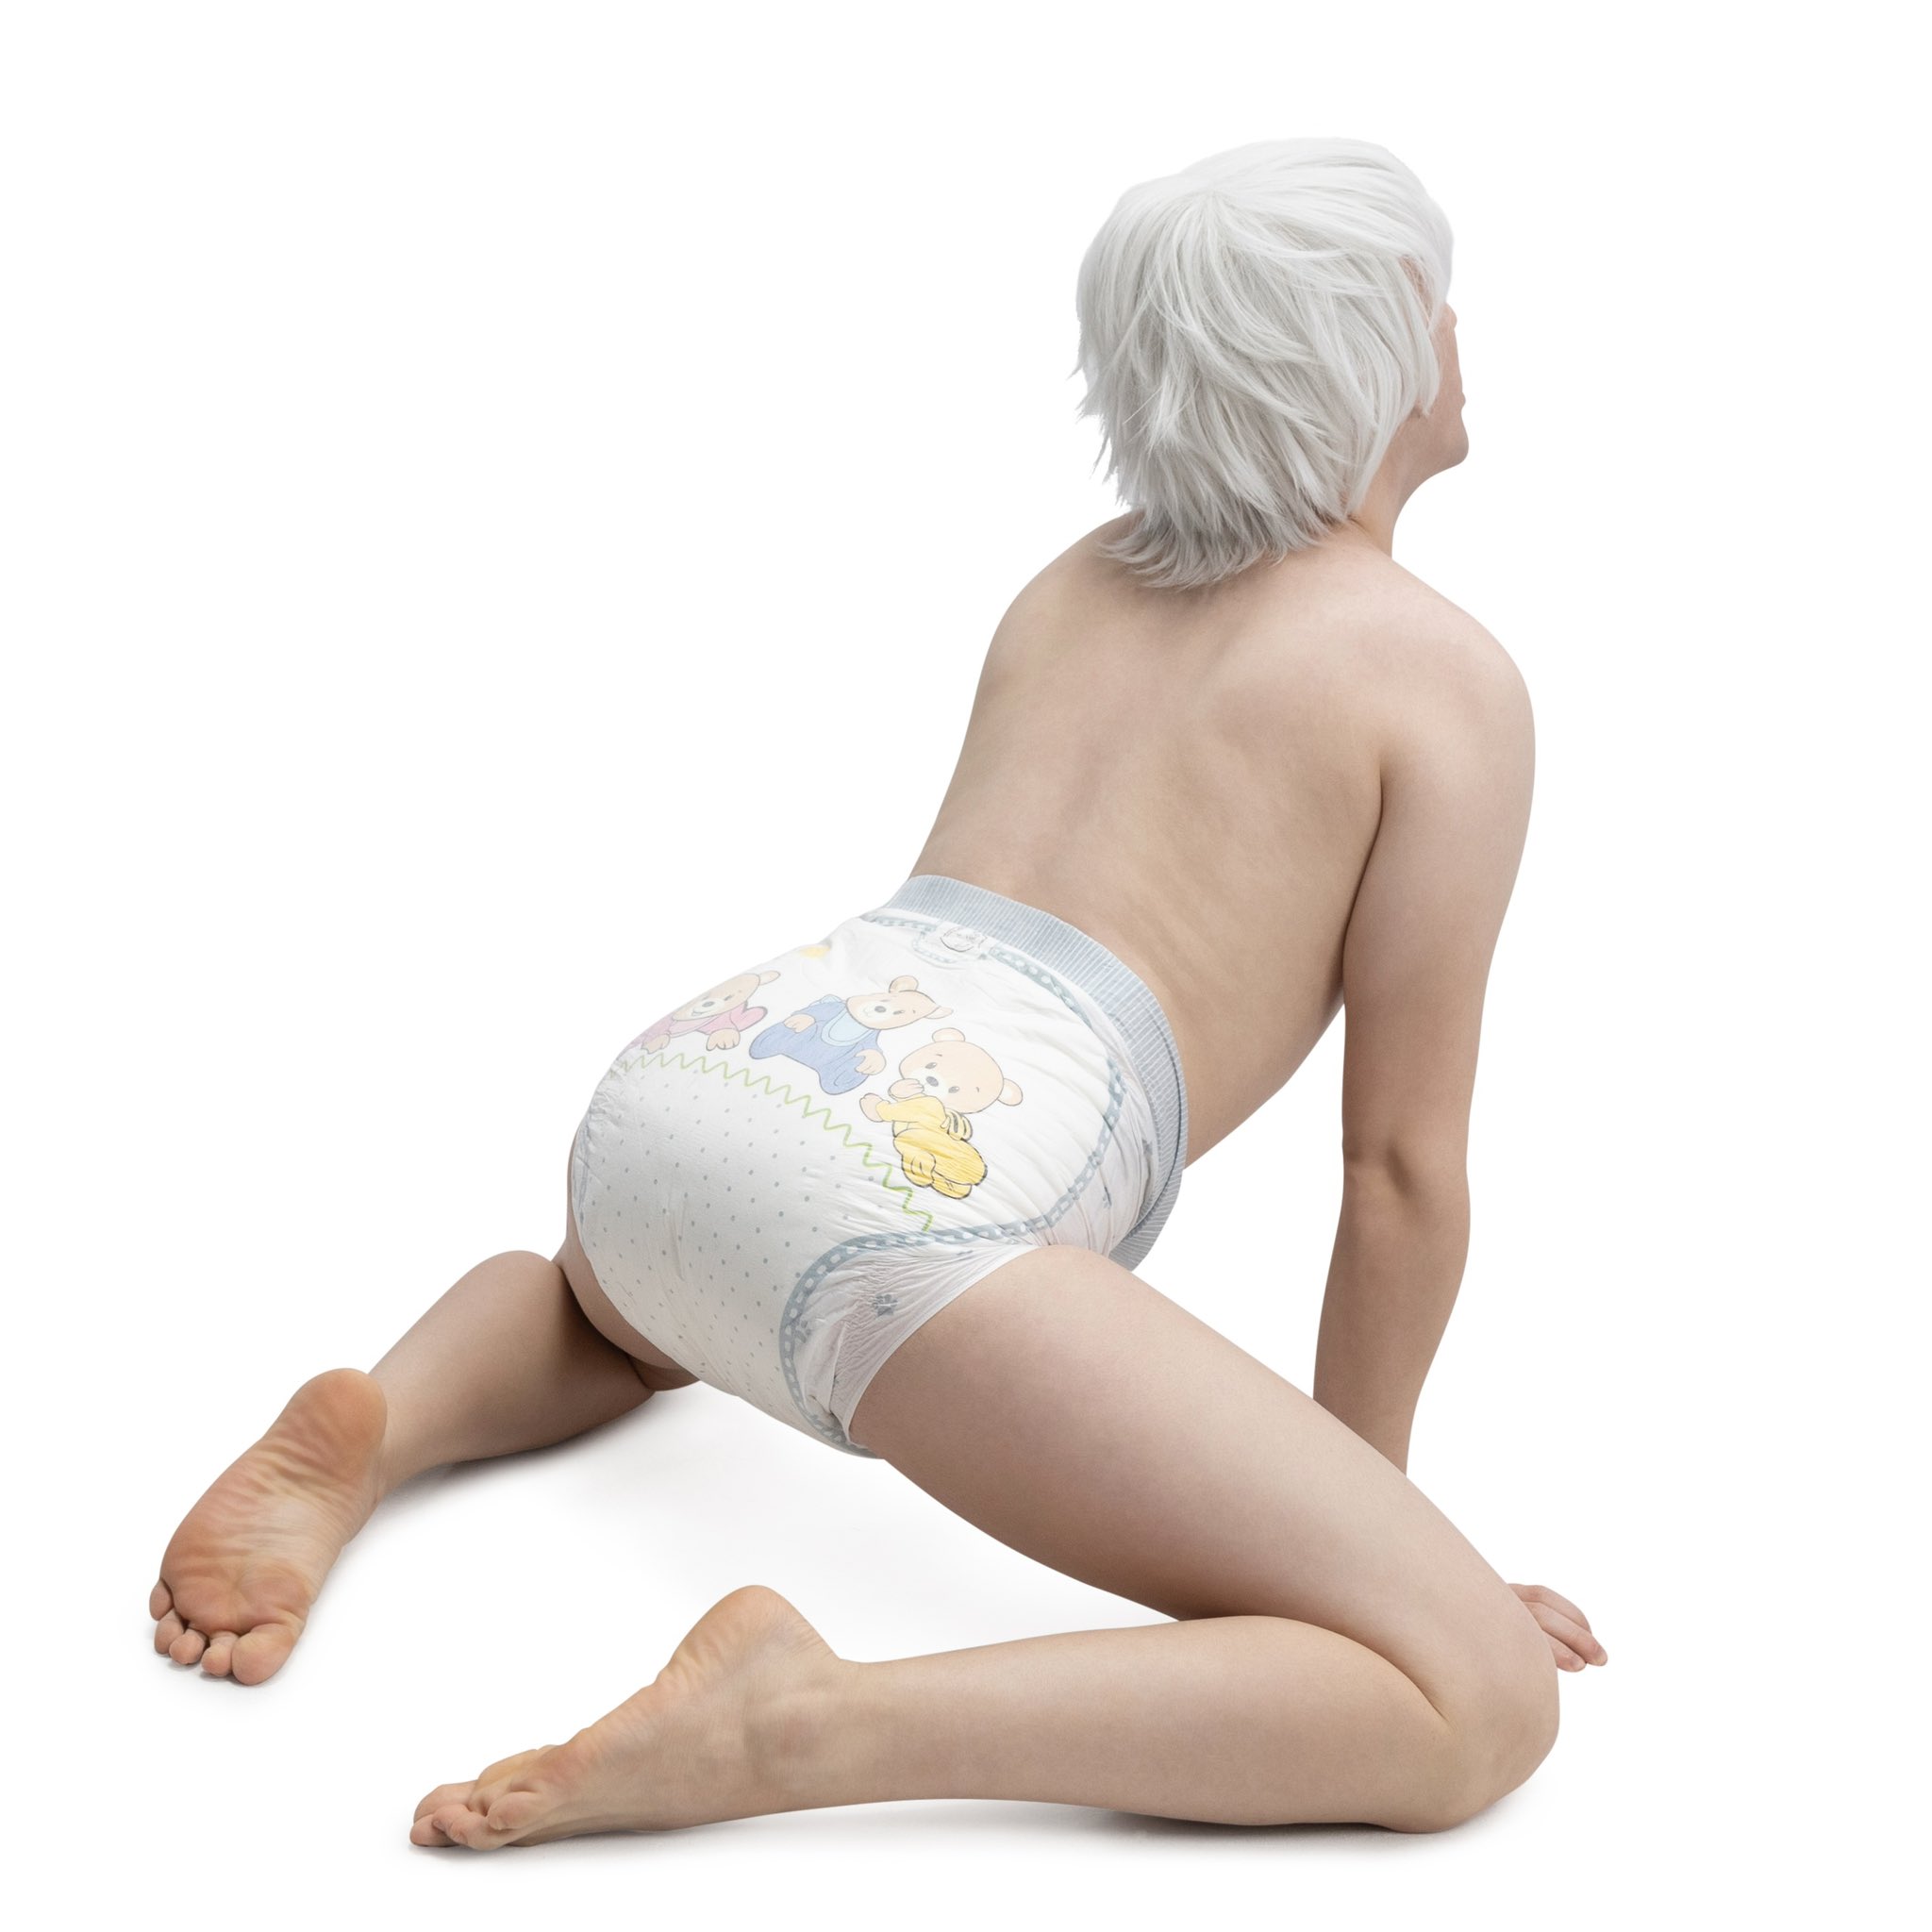 Lil Comforts on X: 🎉 Exciting News! Our beloved Comfy Cubz Diapers are  back in stock! 🐻 And guess what? We're sprinkling some extra love with  snuggly savings – buy a case